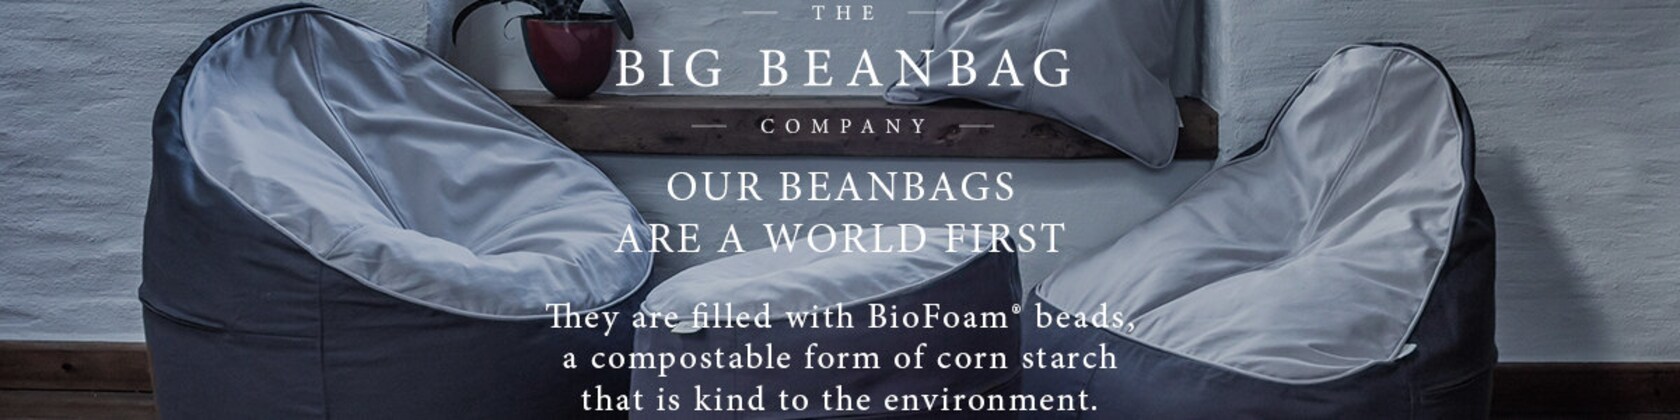 The Big Beanbag Company pioneers compostable filling